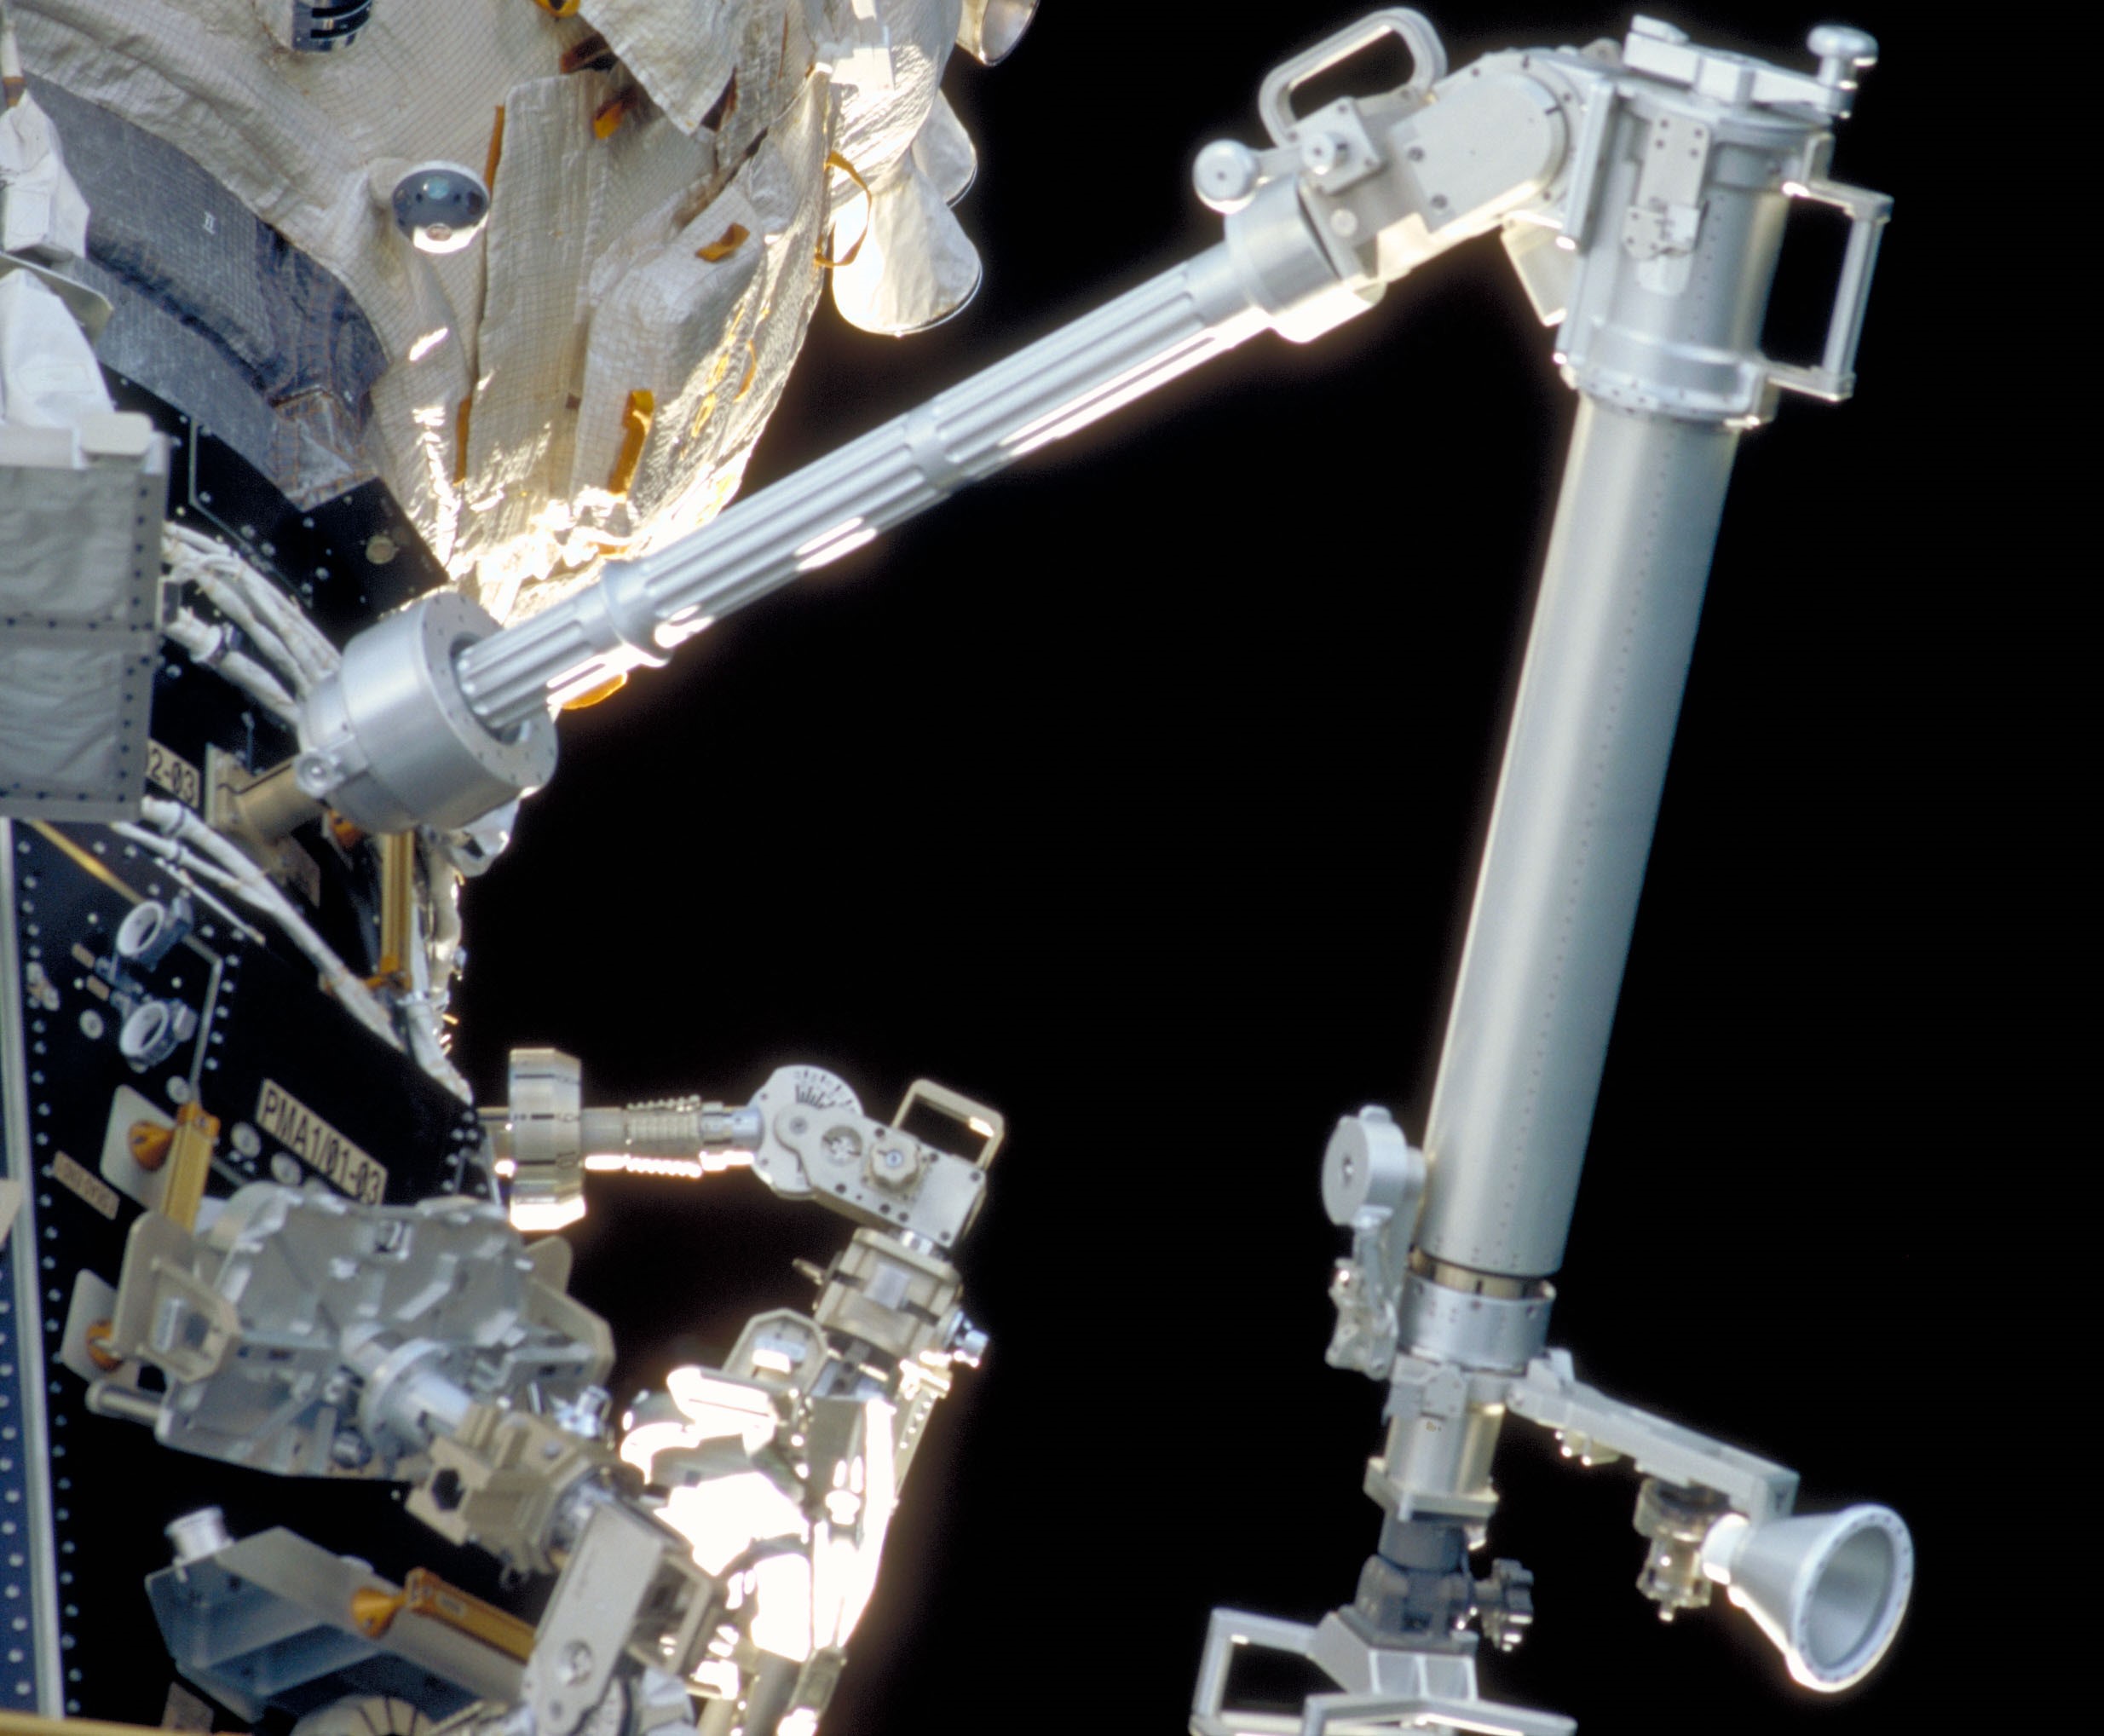 The Orbital Replacement Unit Transfer Device installed on the Pressurized Mating Adapter during the STS-96 spacewalk.